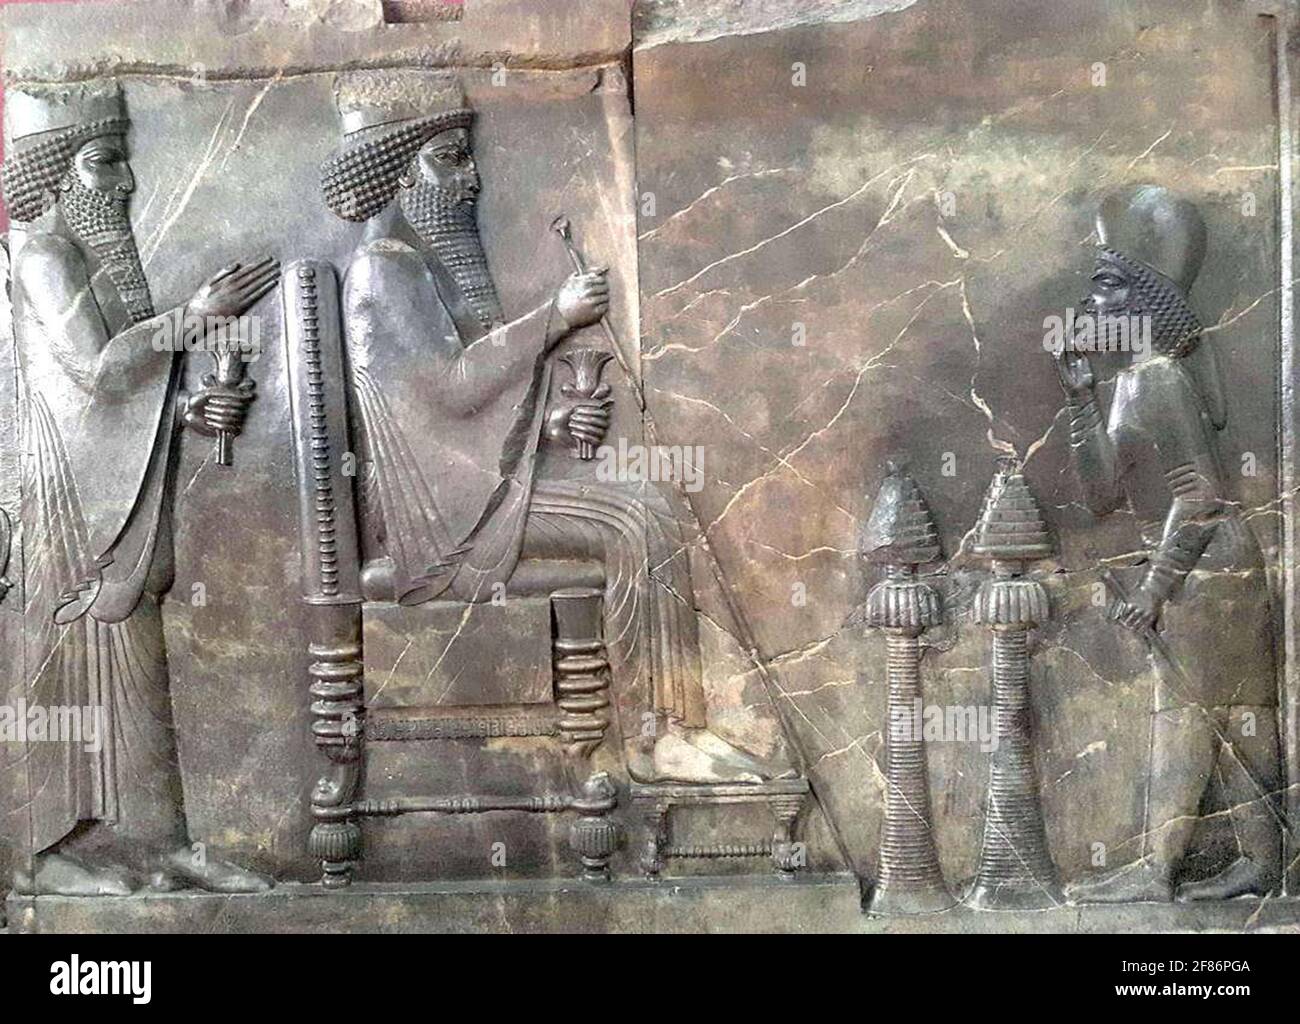 6844. Relief of the Achamenid empire, King Xerxes the great ruled from 486 to 465 BC. Stock Photo